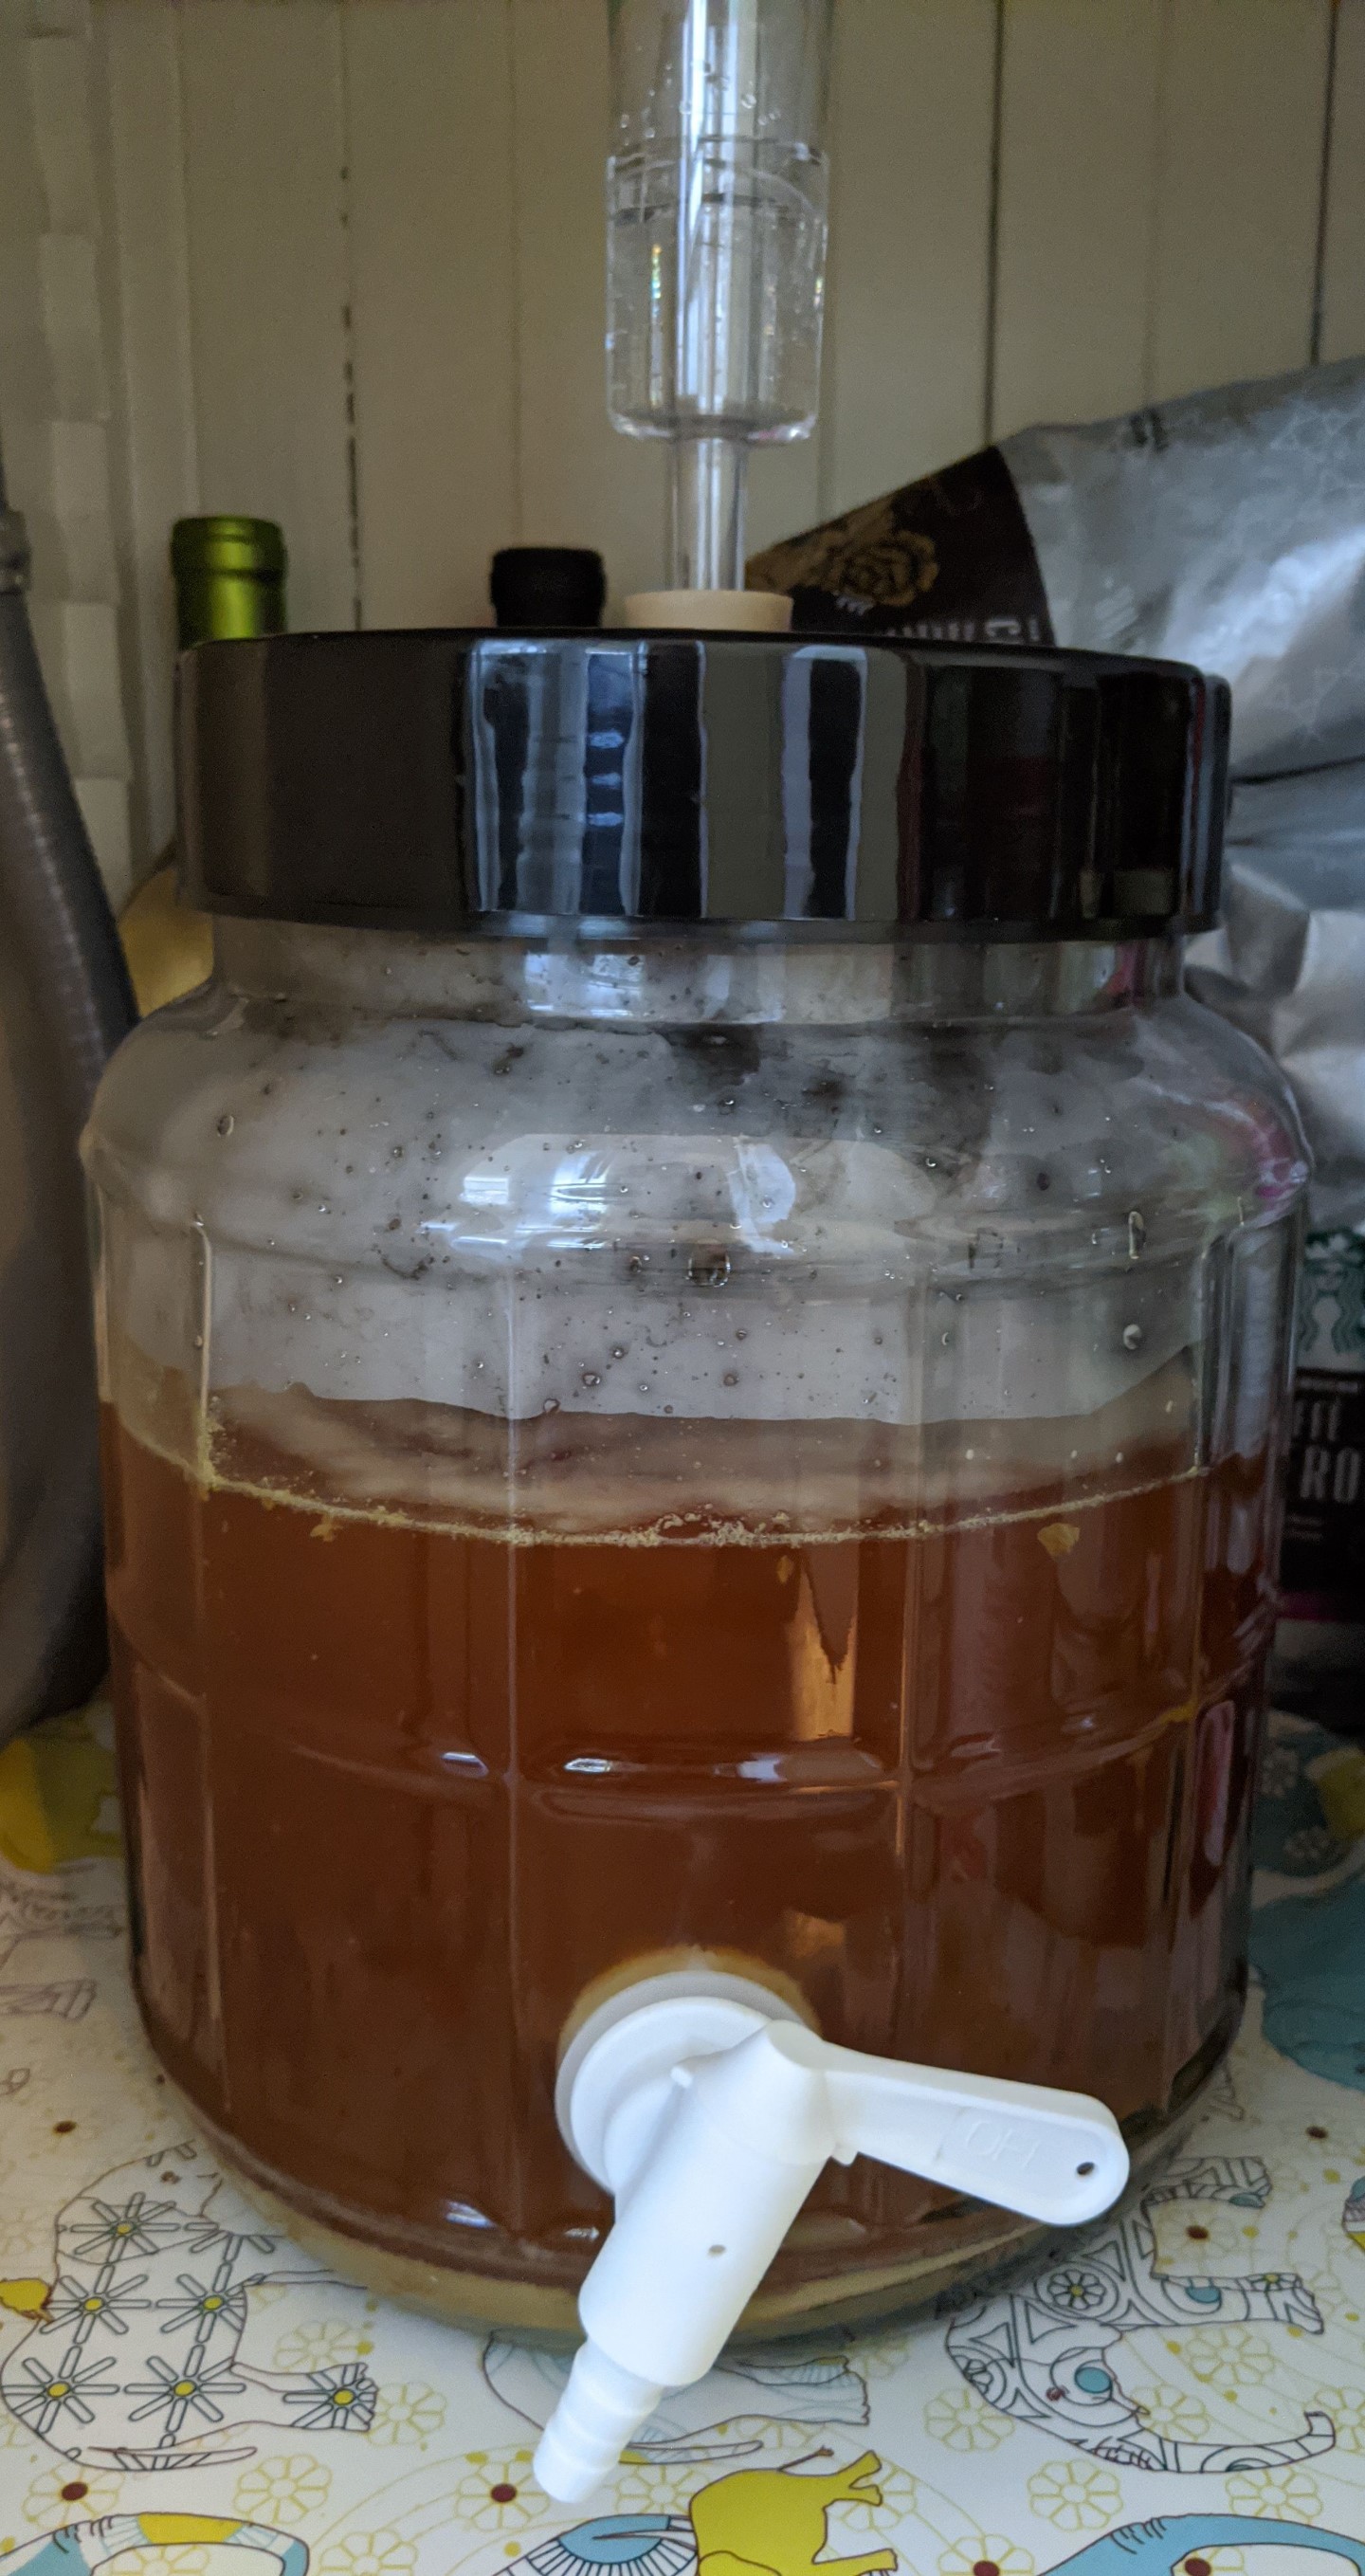 A very small glass beer fermenter full of brown liquid